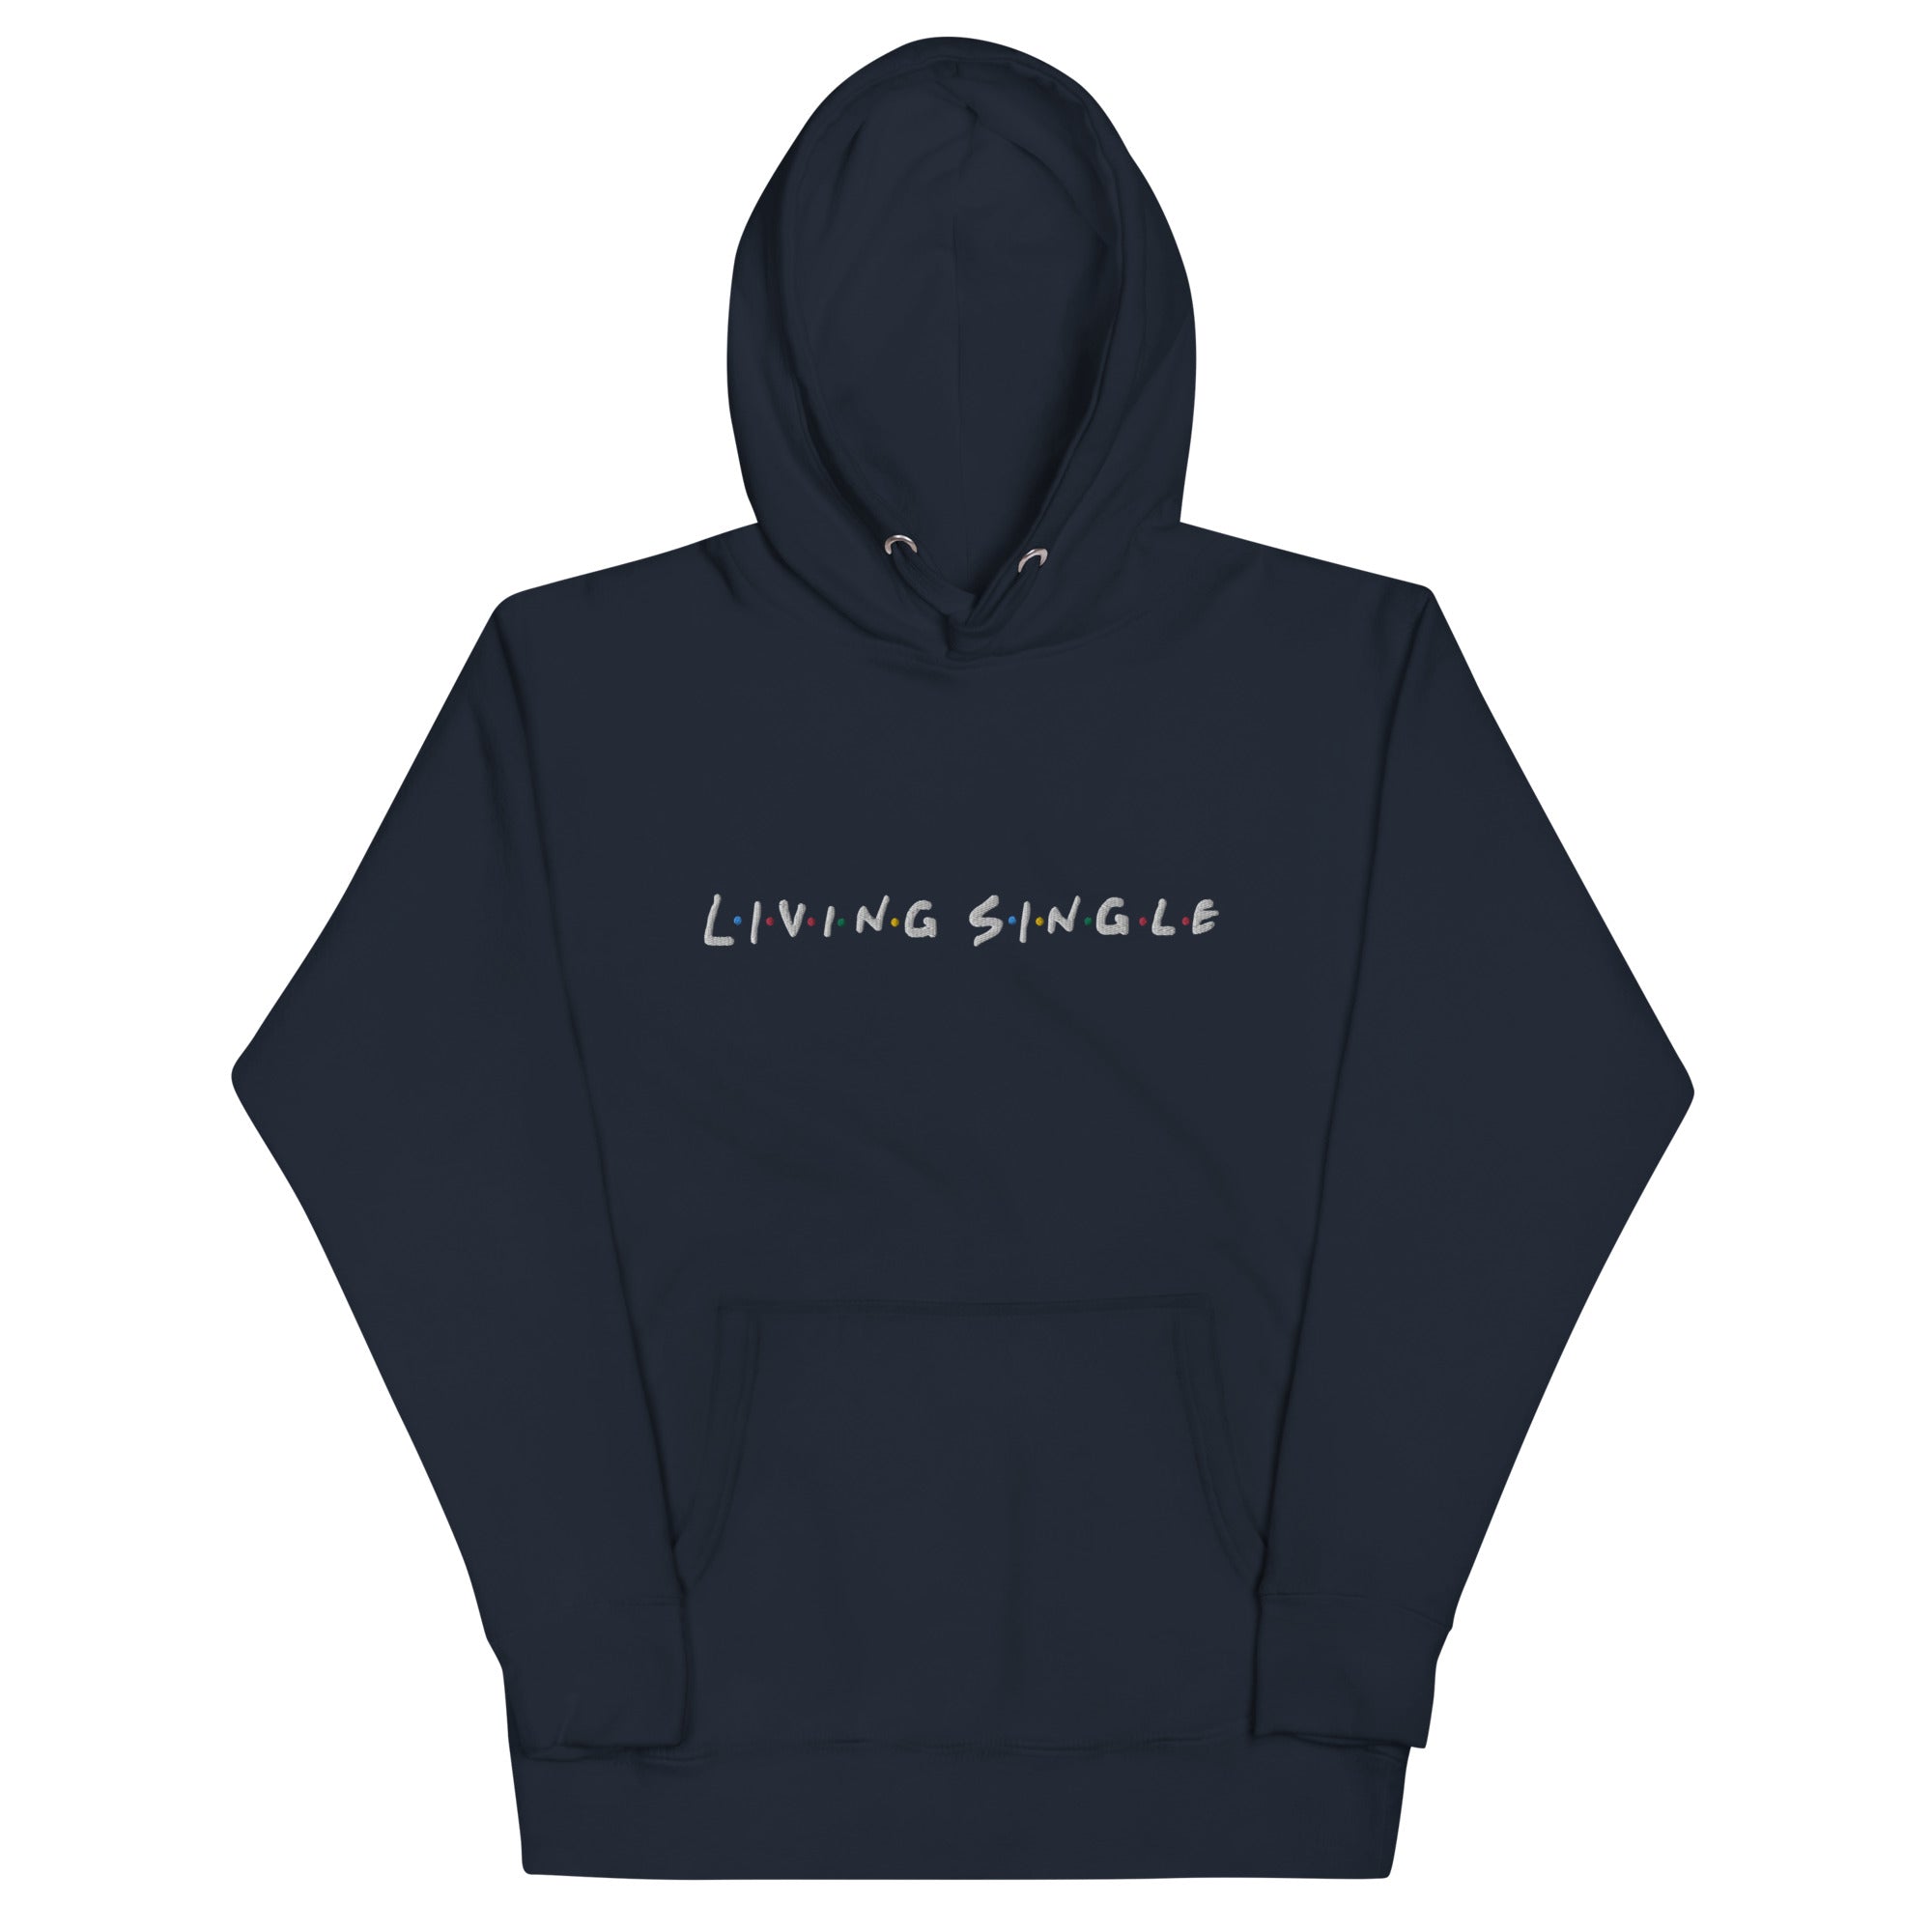 Living Single Embroidered Unisex Hoodie